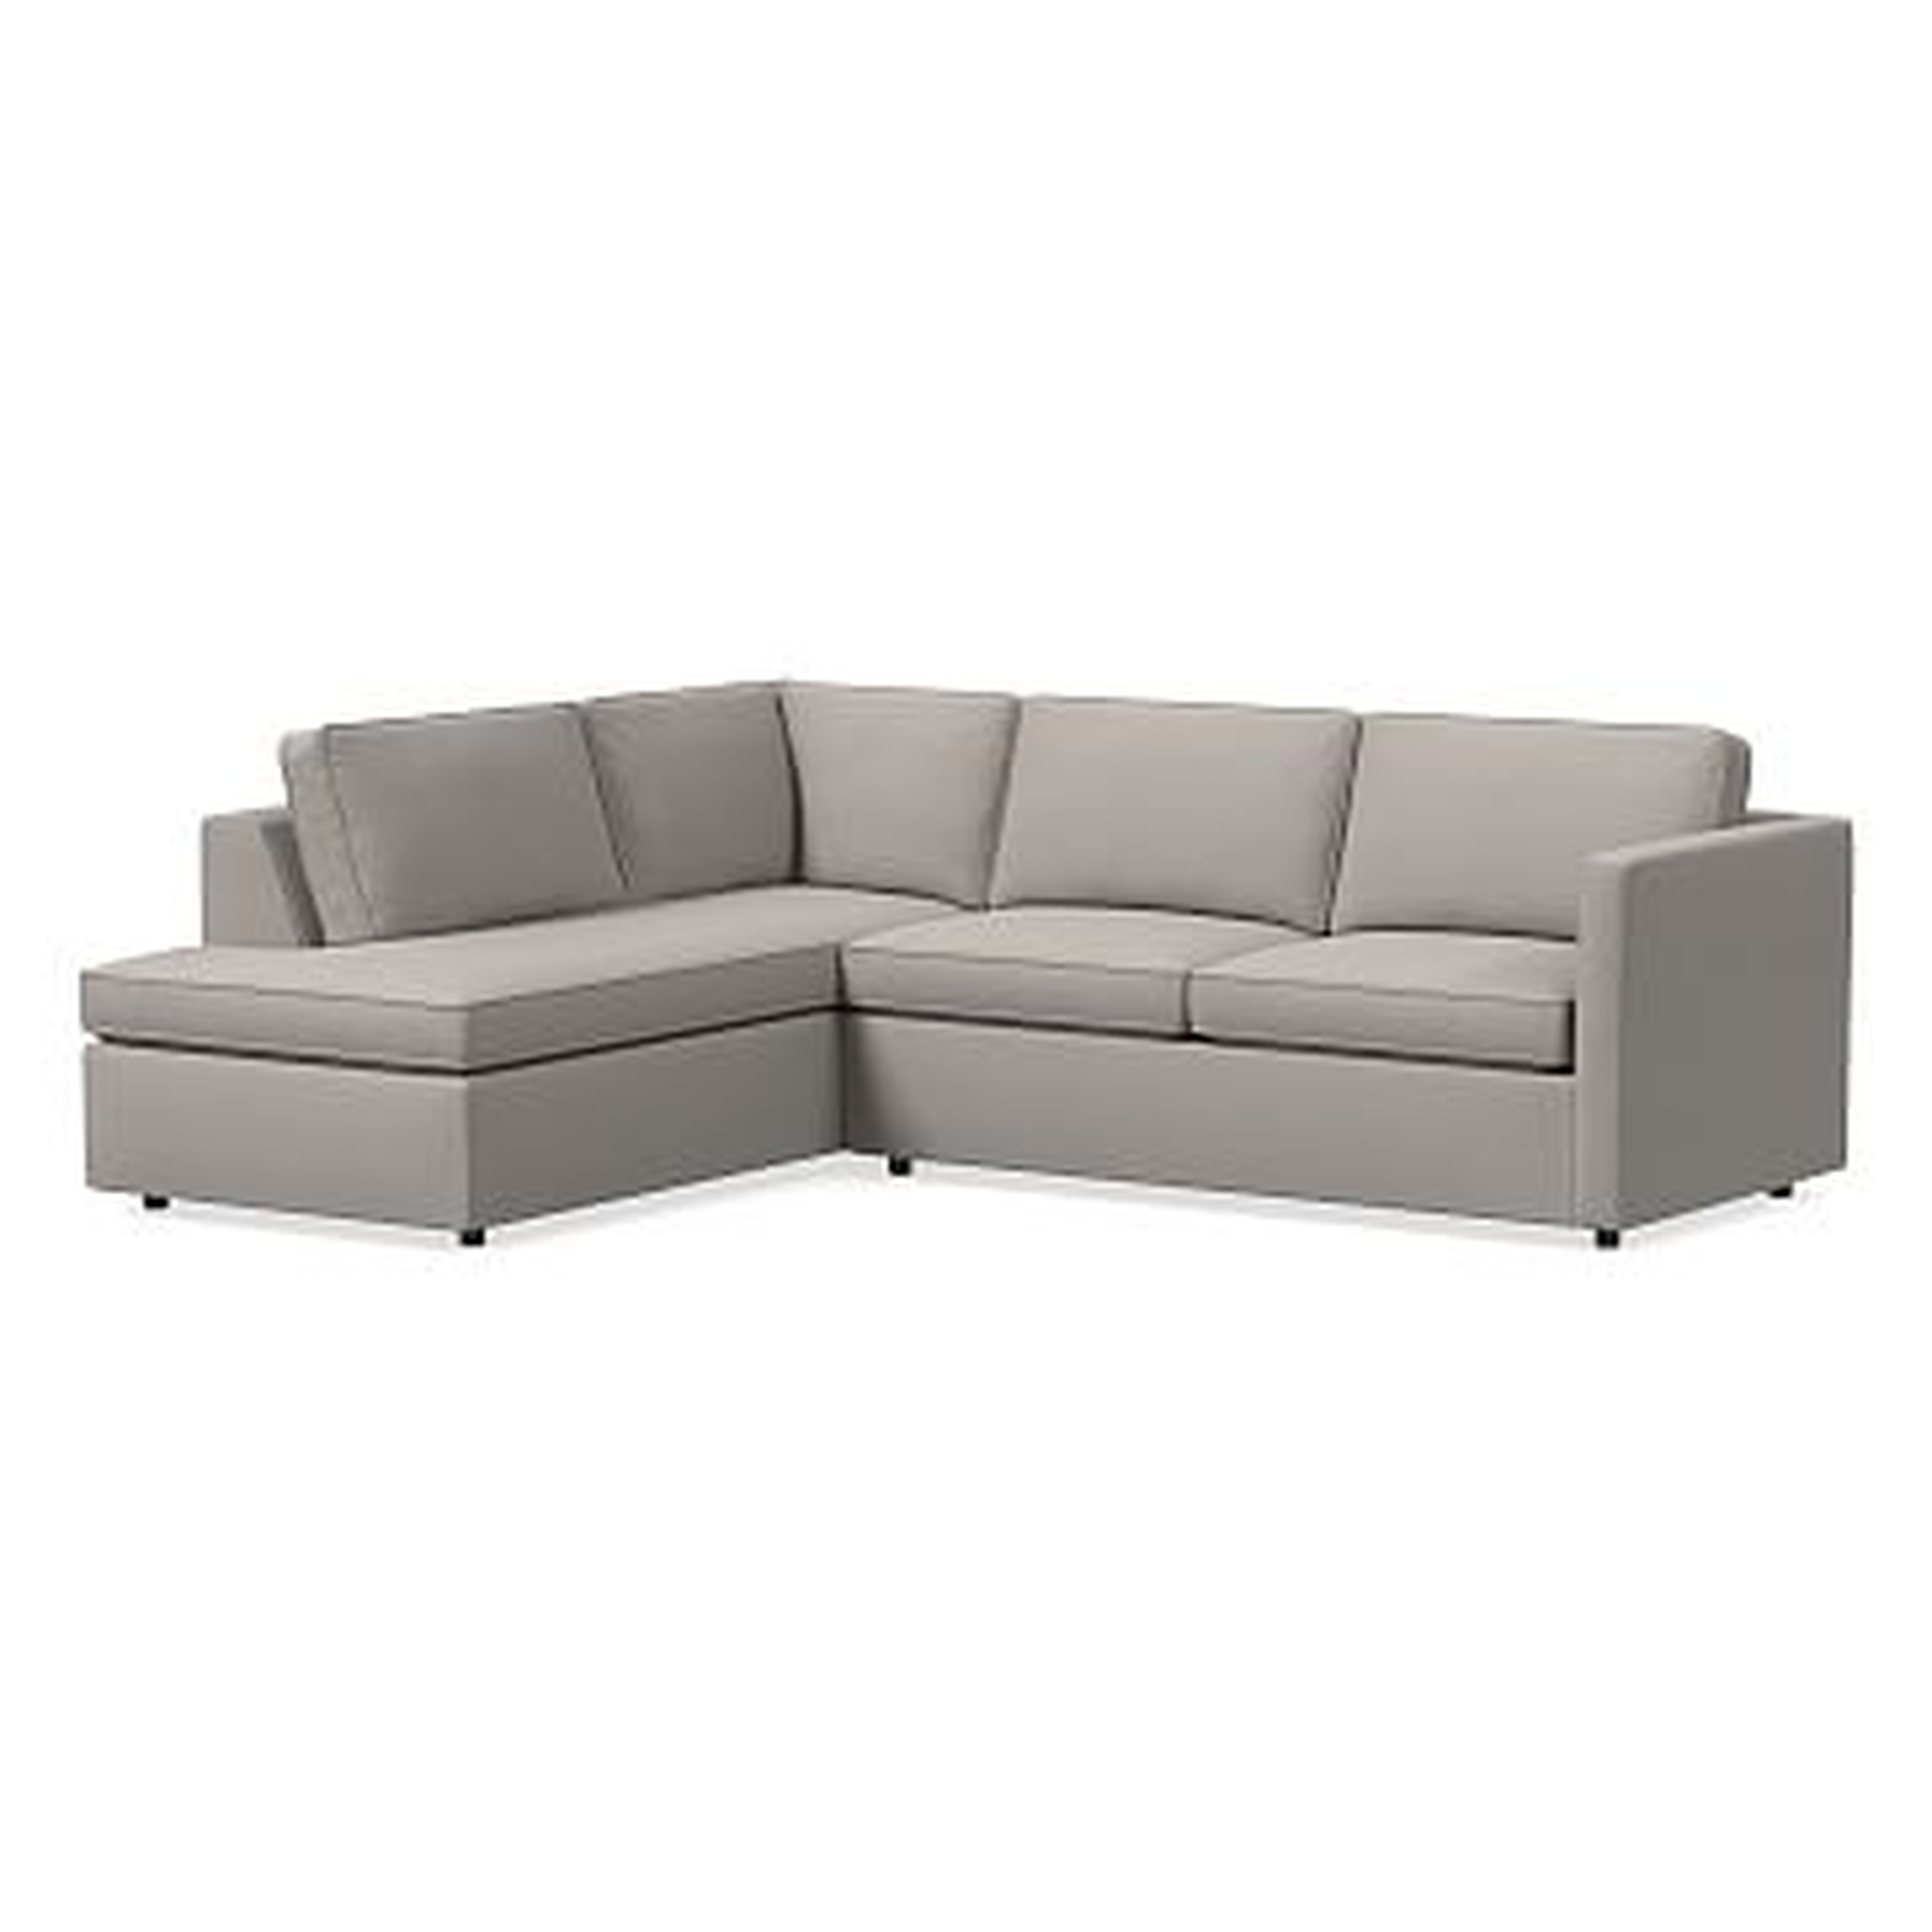 Harris Sectional Set 36: Petite RA 65" Sofa, Petite LA Terminal Chaise, Poly, Performance Velvet, Silver, Concealed Supports - West Elm